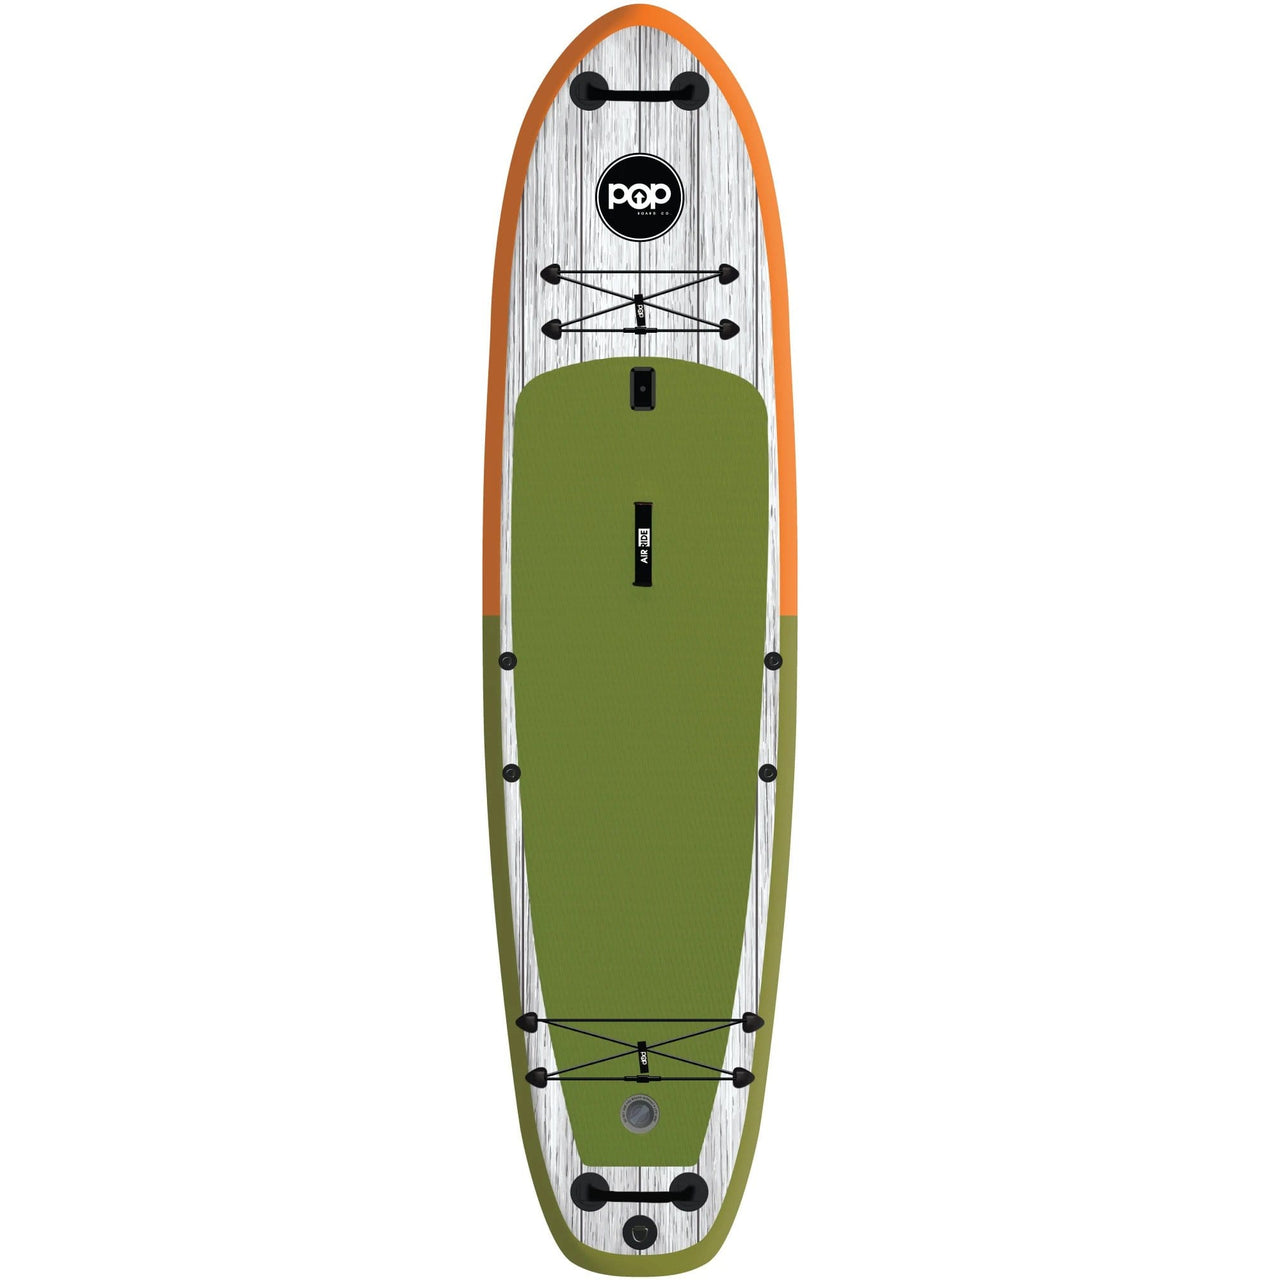 POP Board Co 11'6" El Capitán Orange/Green Stand Up Paddle Board - Good Wave